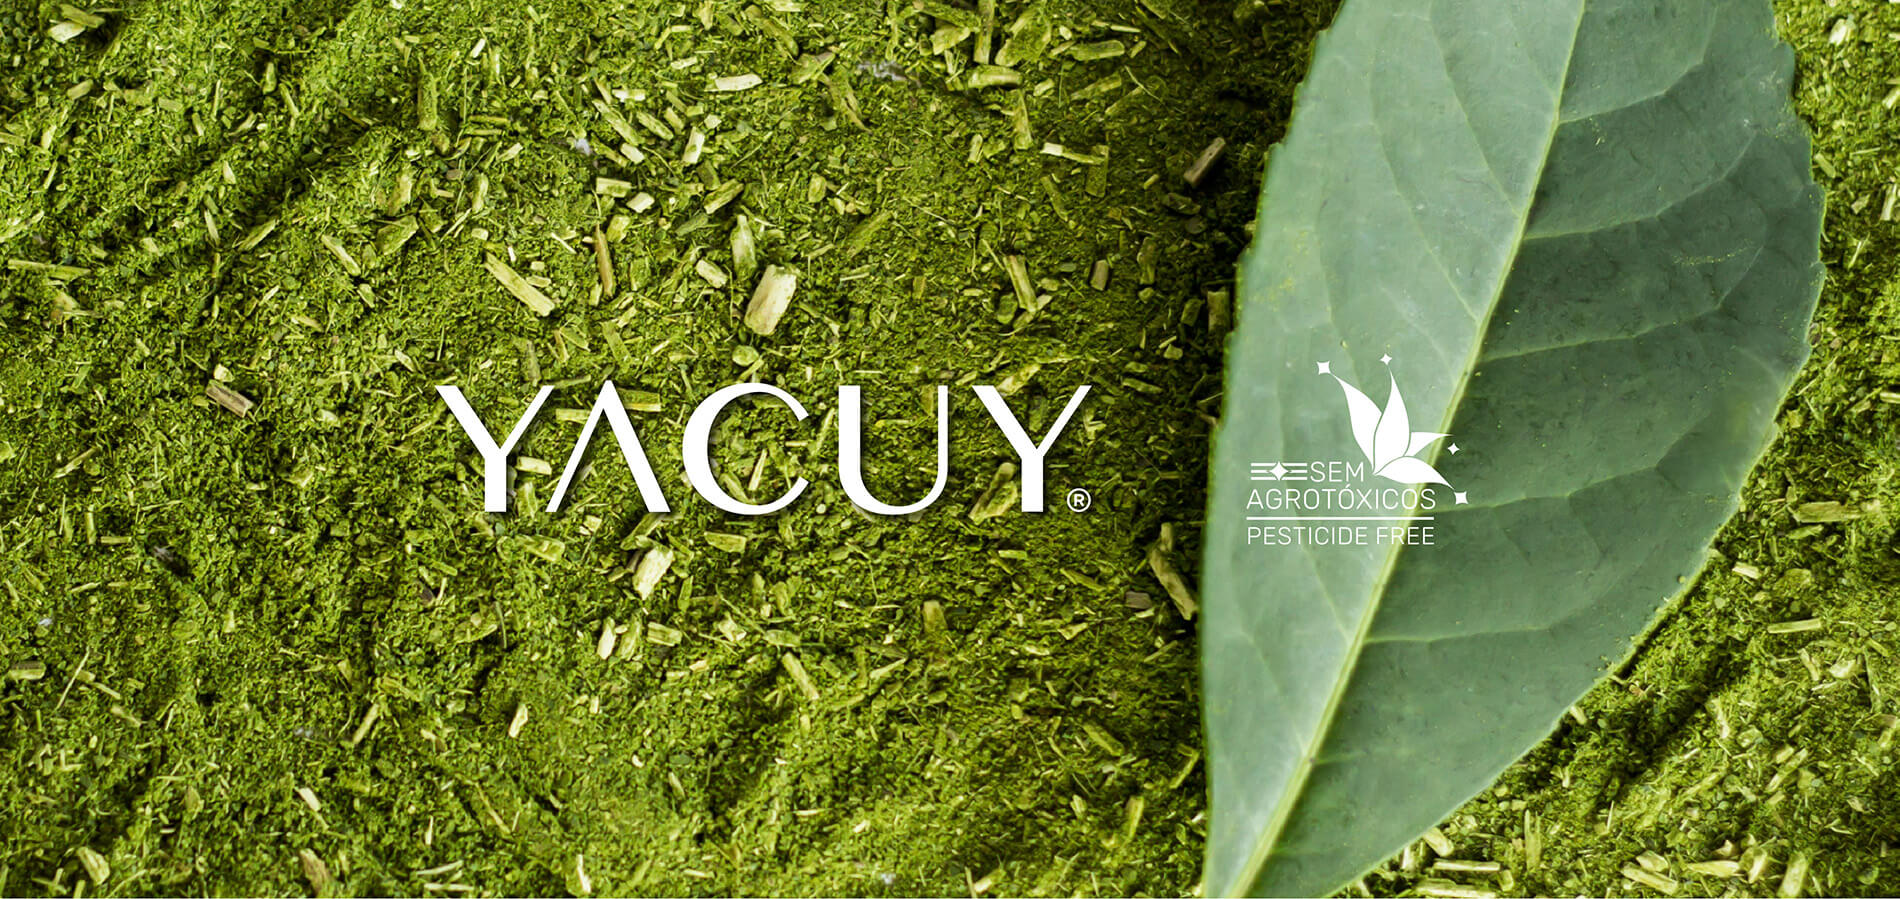 Yacuy - No Agrochemicals